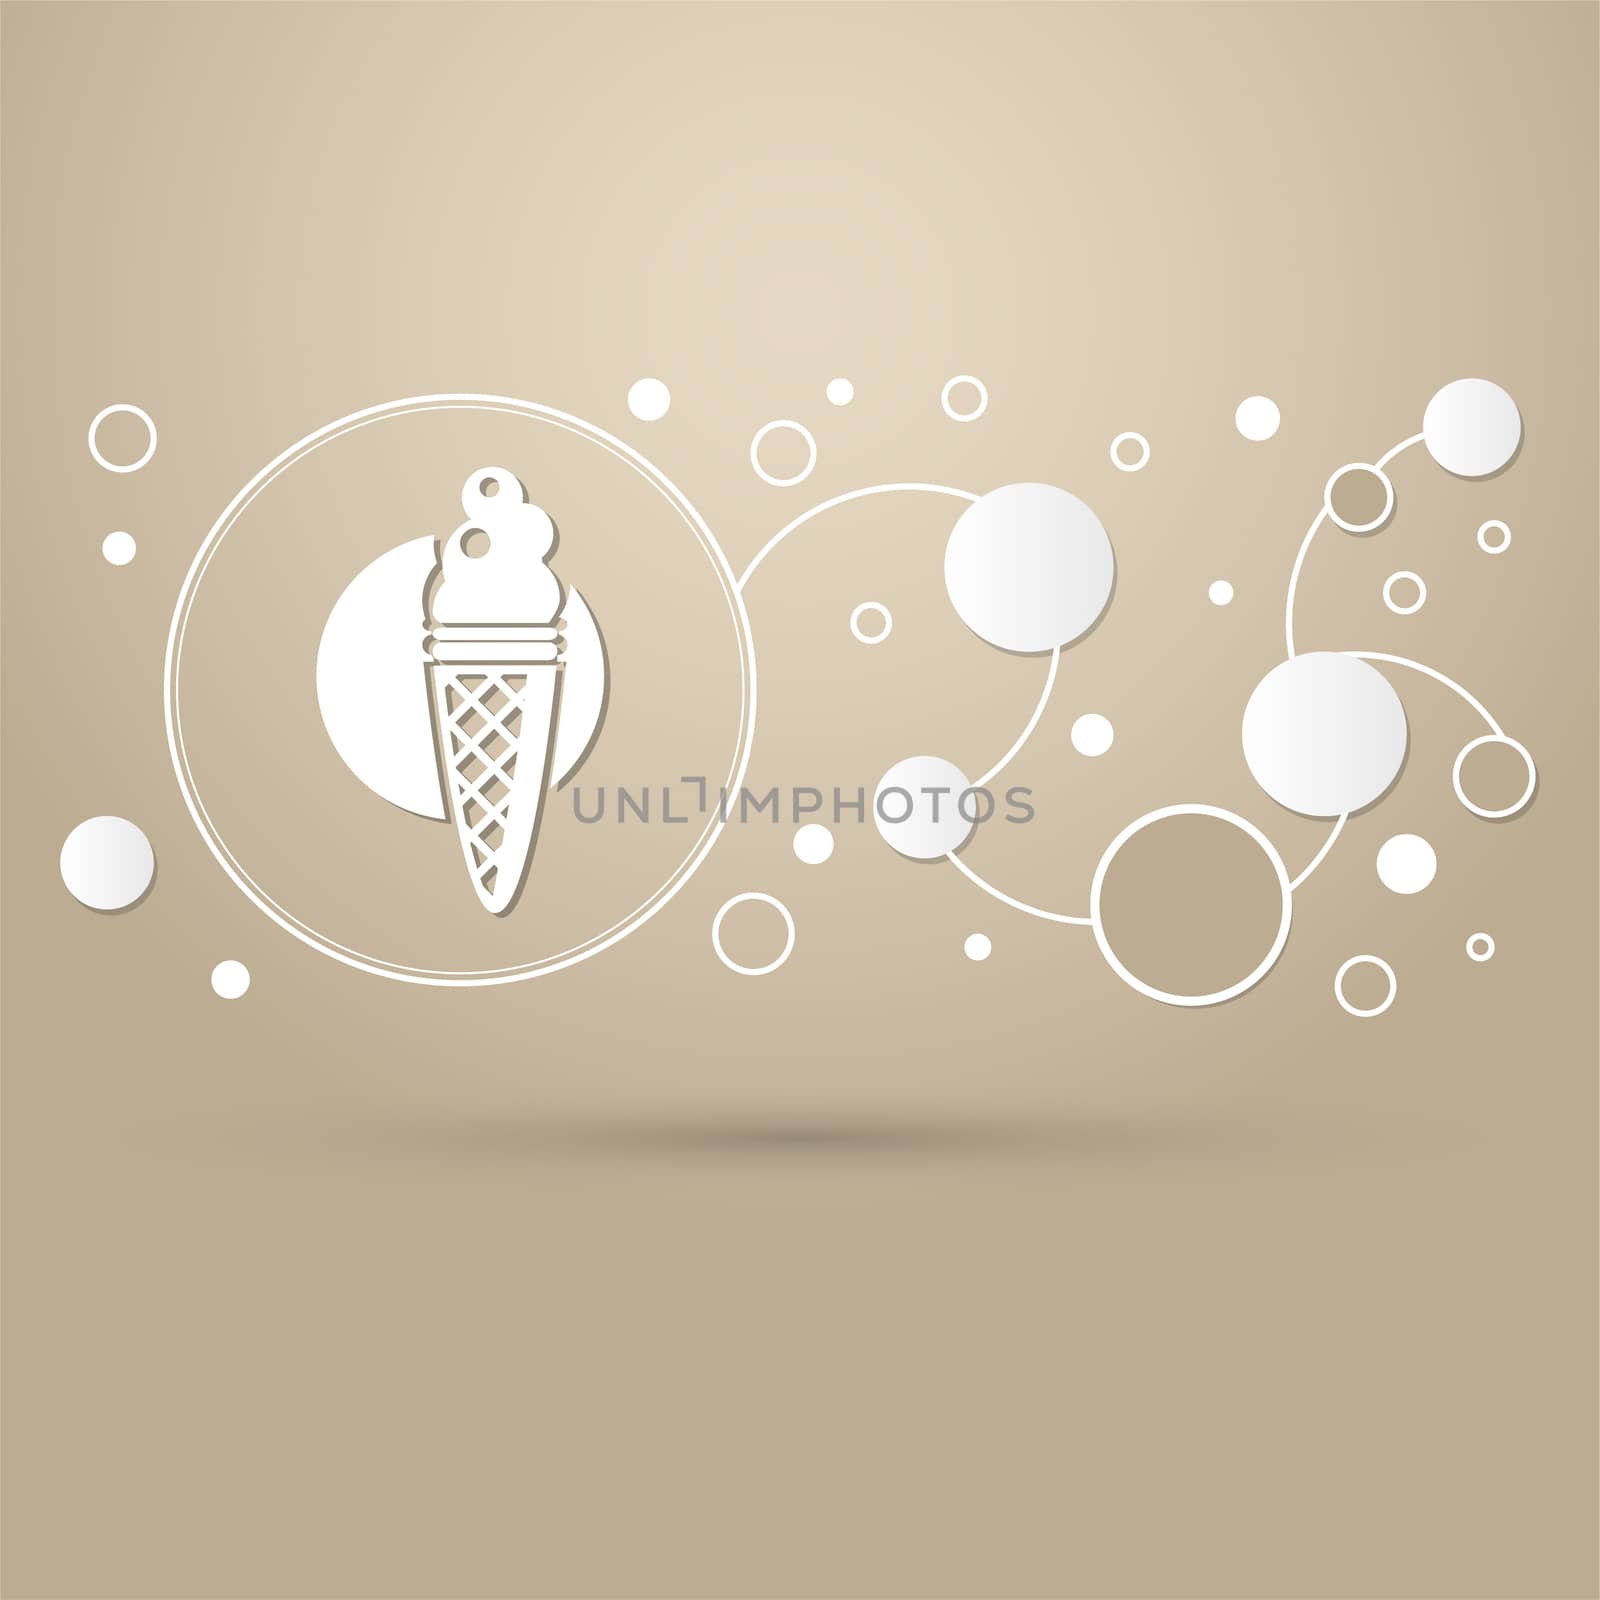 Ice Cream icon on a brown background with elegant style and modern design infographic. illustration